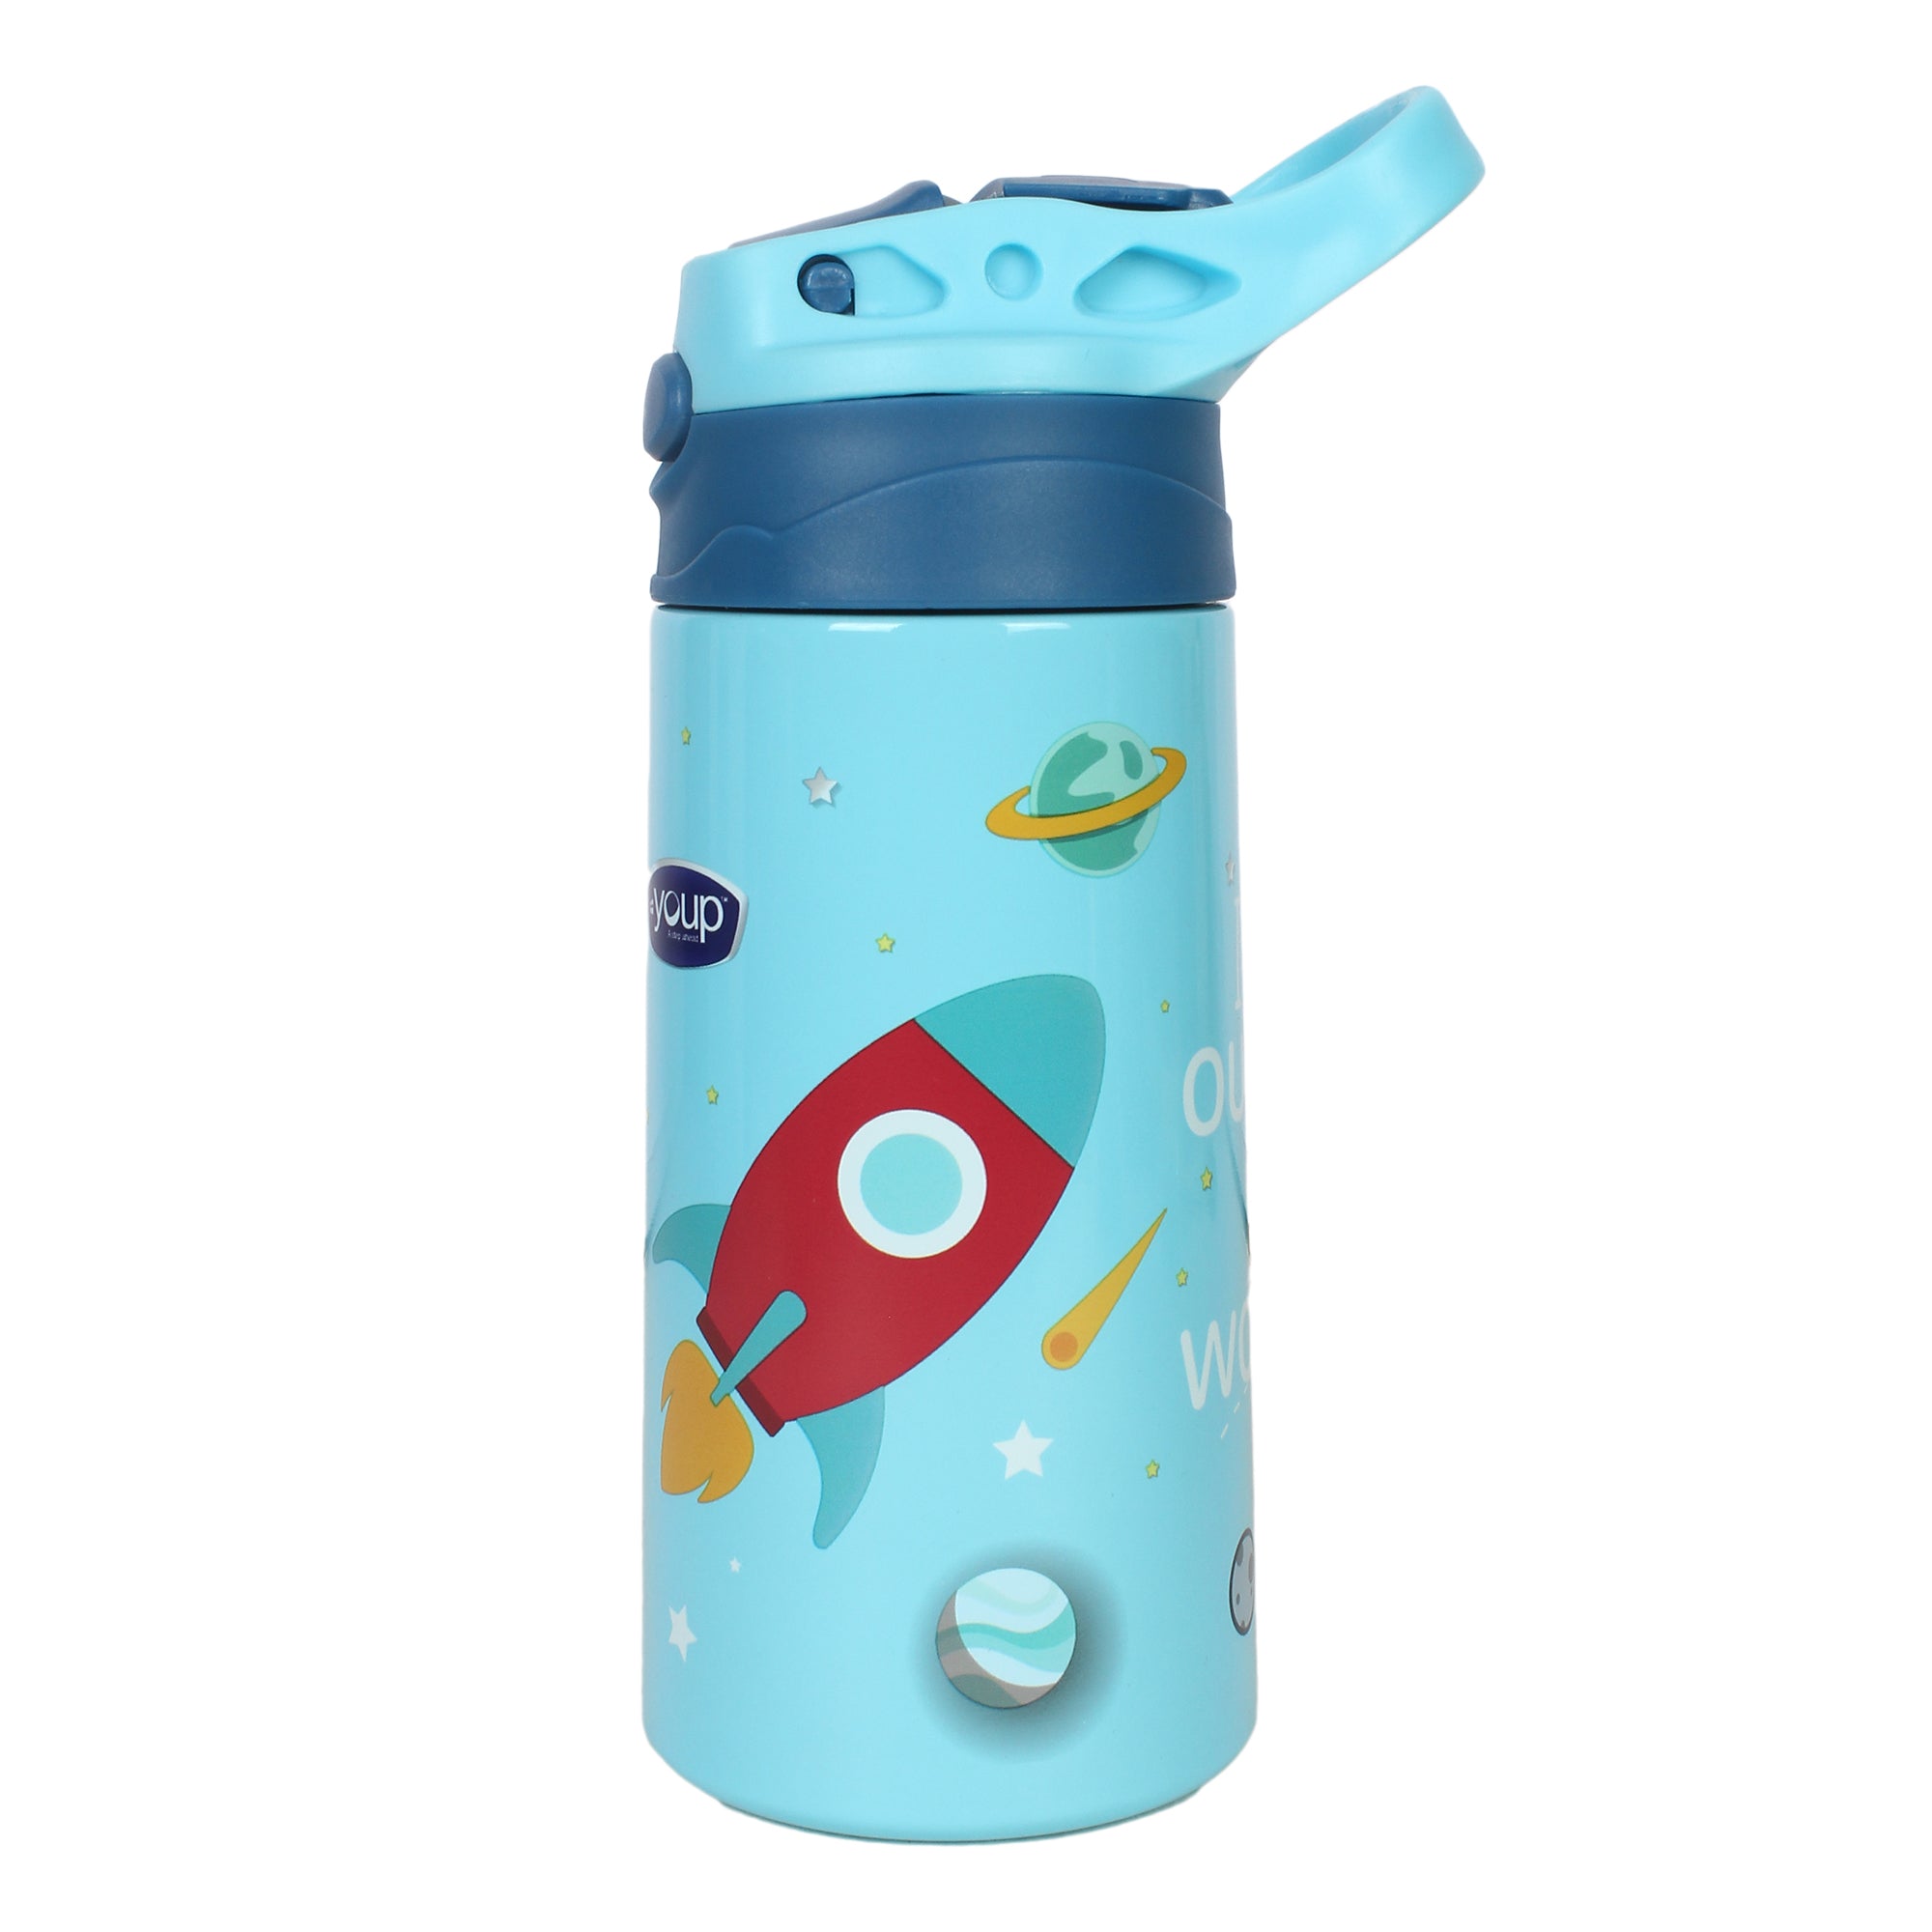 Youp Stainless Steel Insulated Blue Color Space Theme Kids Anti-Dust Sipper Bottle Tinkler - 400 Ml